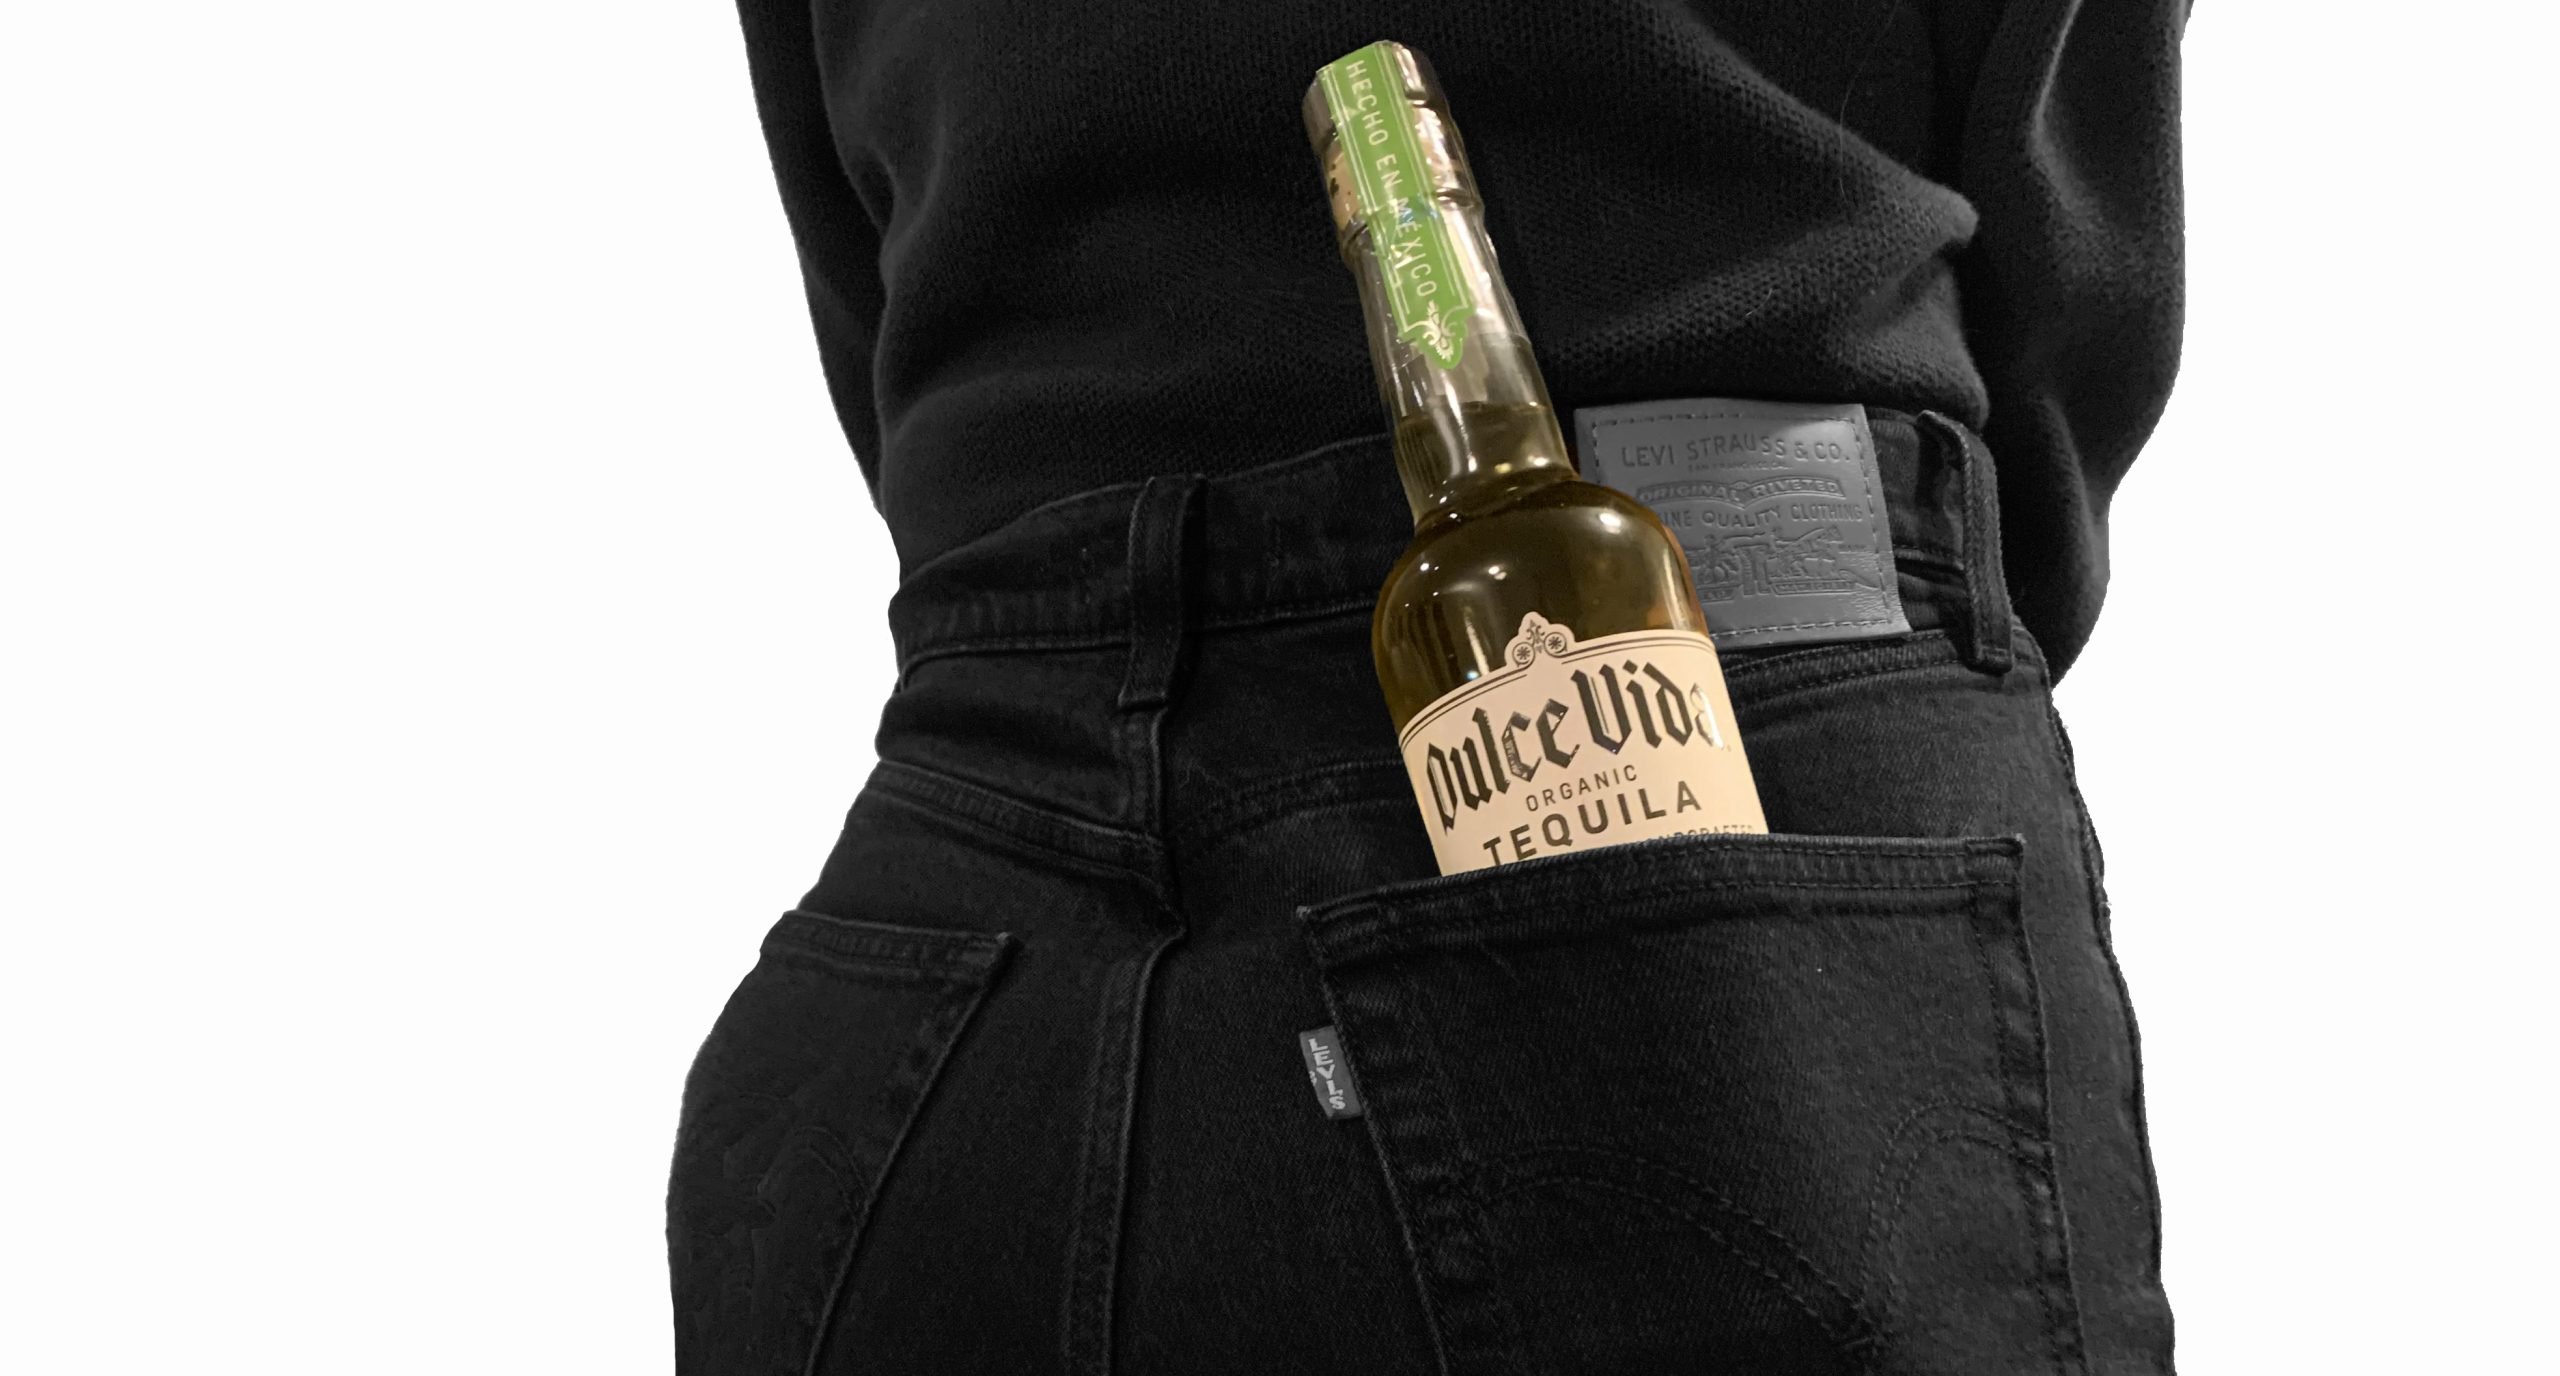 Corona doppelganger? From a few yards away, a 375 mL bottle of Dulce Vida stuck in a back pocket could easily pass for a bottle of the popular Mexican cerveza. Photo by Arick Wierson for Worth 